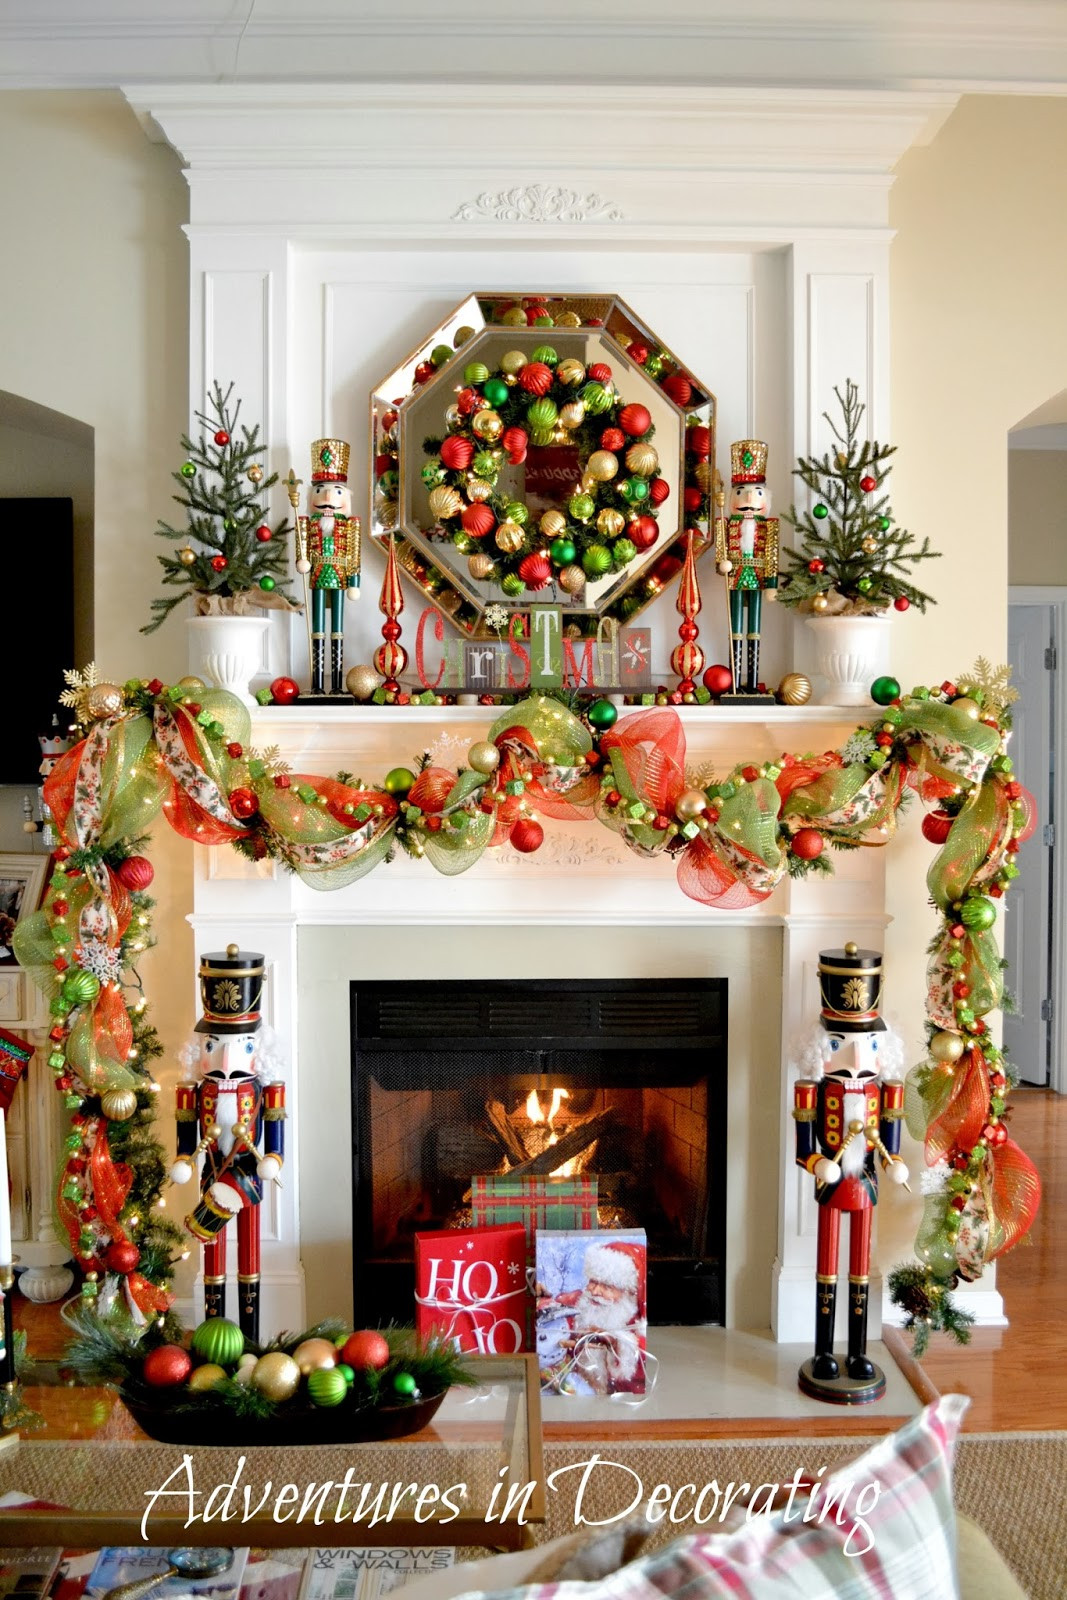 Decorating Fireplace For Christmas
 Adventures in Decorating Our Christmas Mantel and "Deck